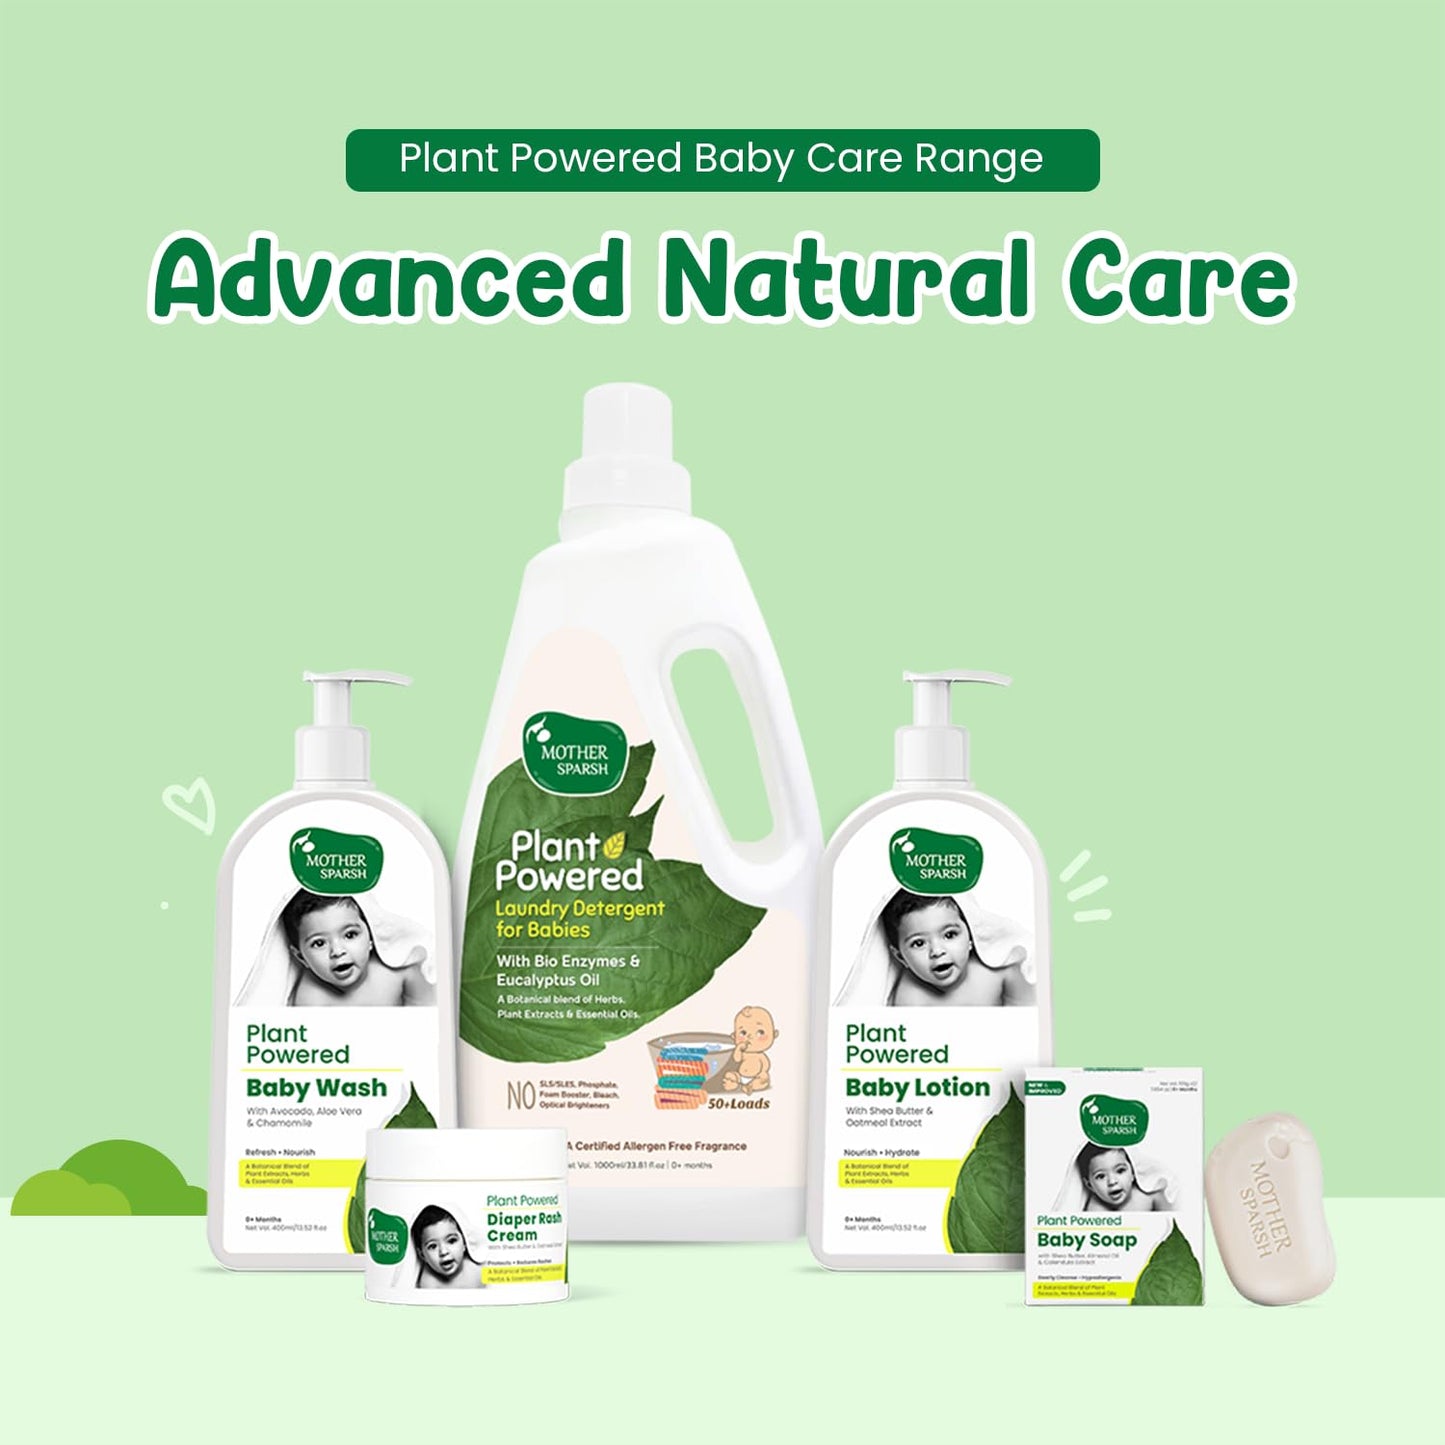 Mother Sparsh Plant Powered Laundry Detergent for Babies - Refill Pack - 500ml (Pack of 2)